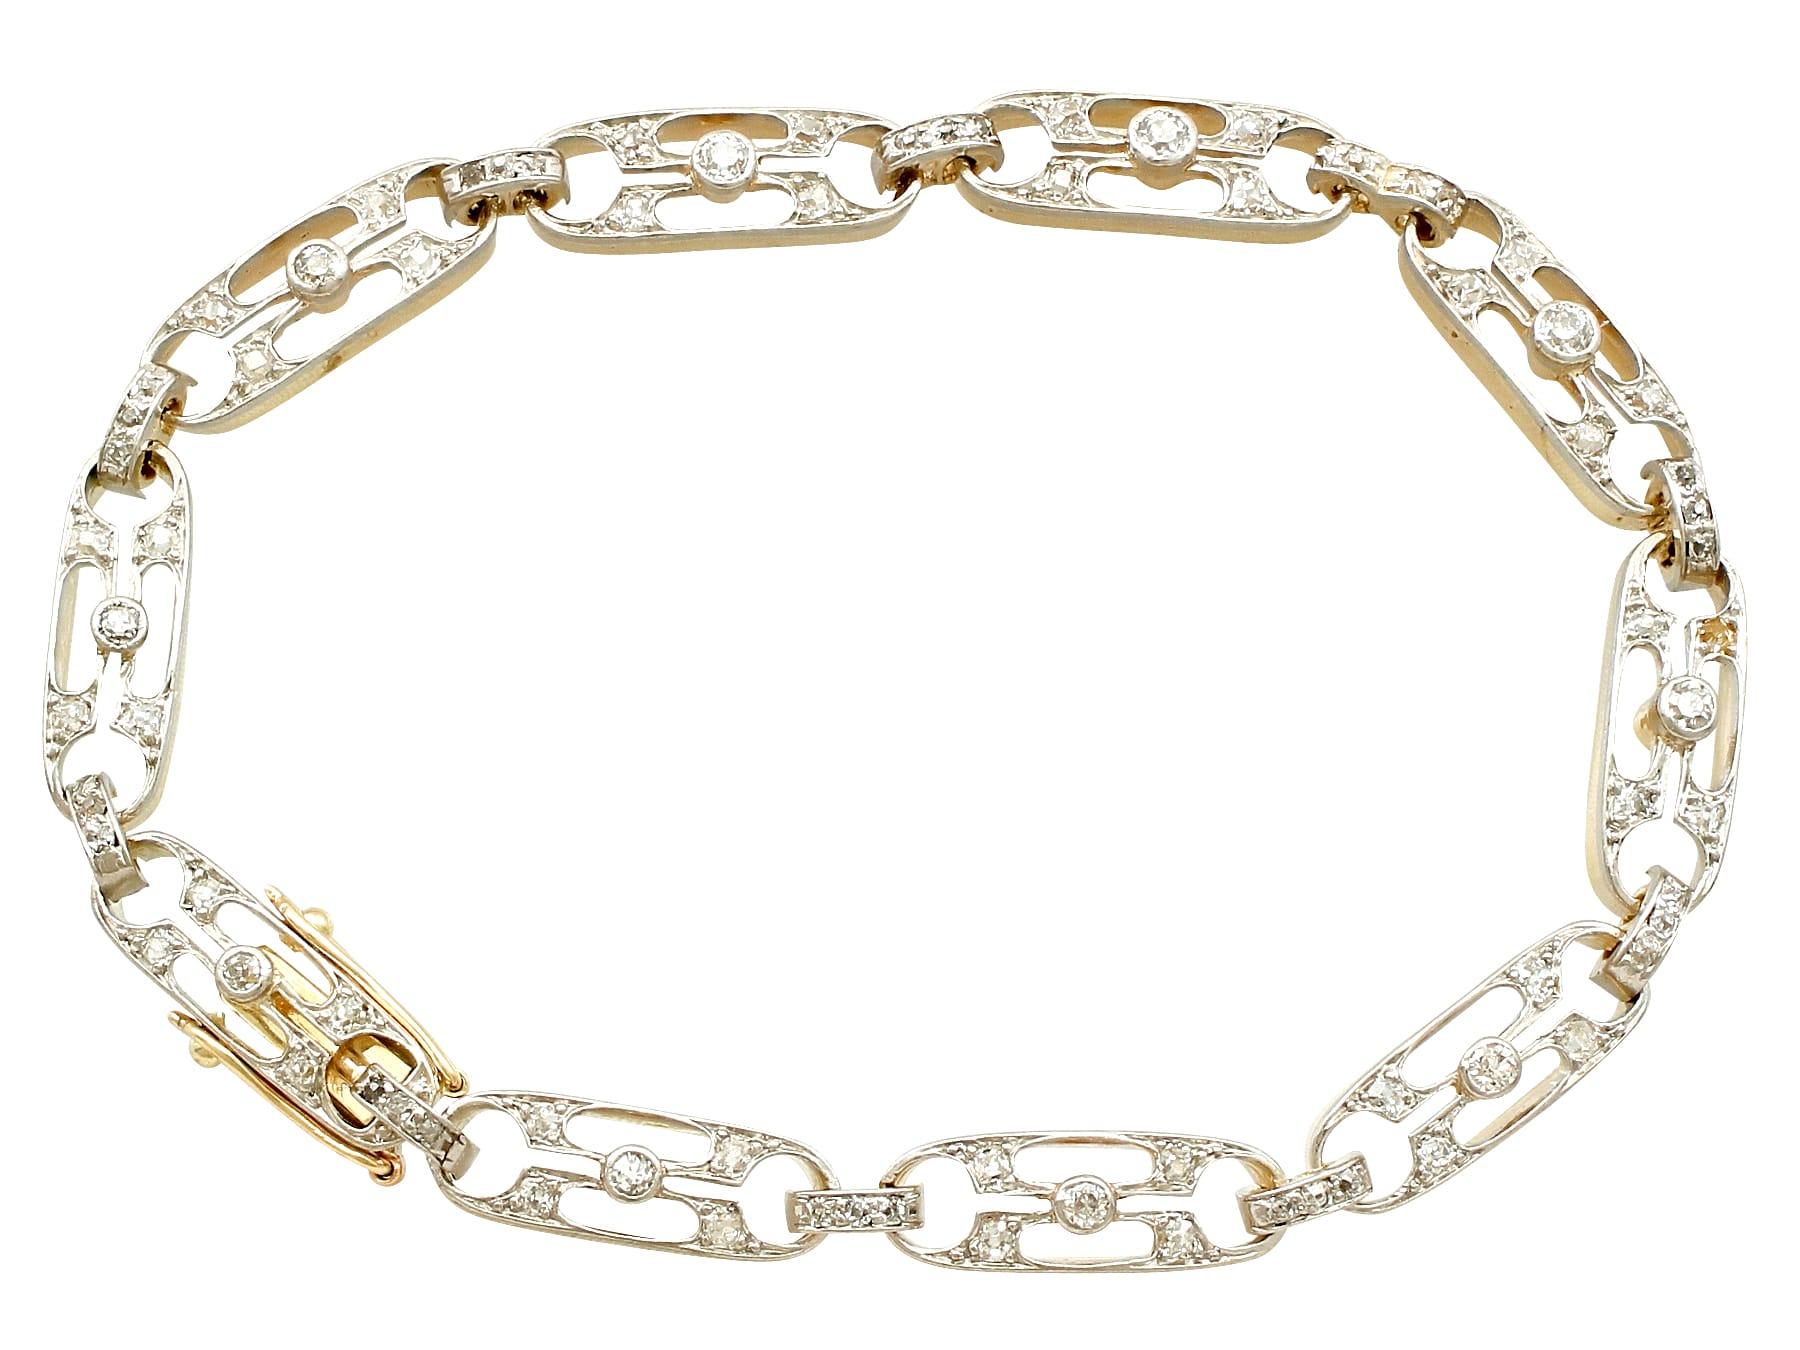 An impressive antique 1.05 carat diamond and 12 karat yellow gold, platinum set bracelet; part of our diverse antique jewelry and estate jewelry collections.

This fine and impressive antique diamond bracelet has been crafted in 12k yellow gold with